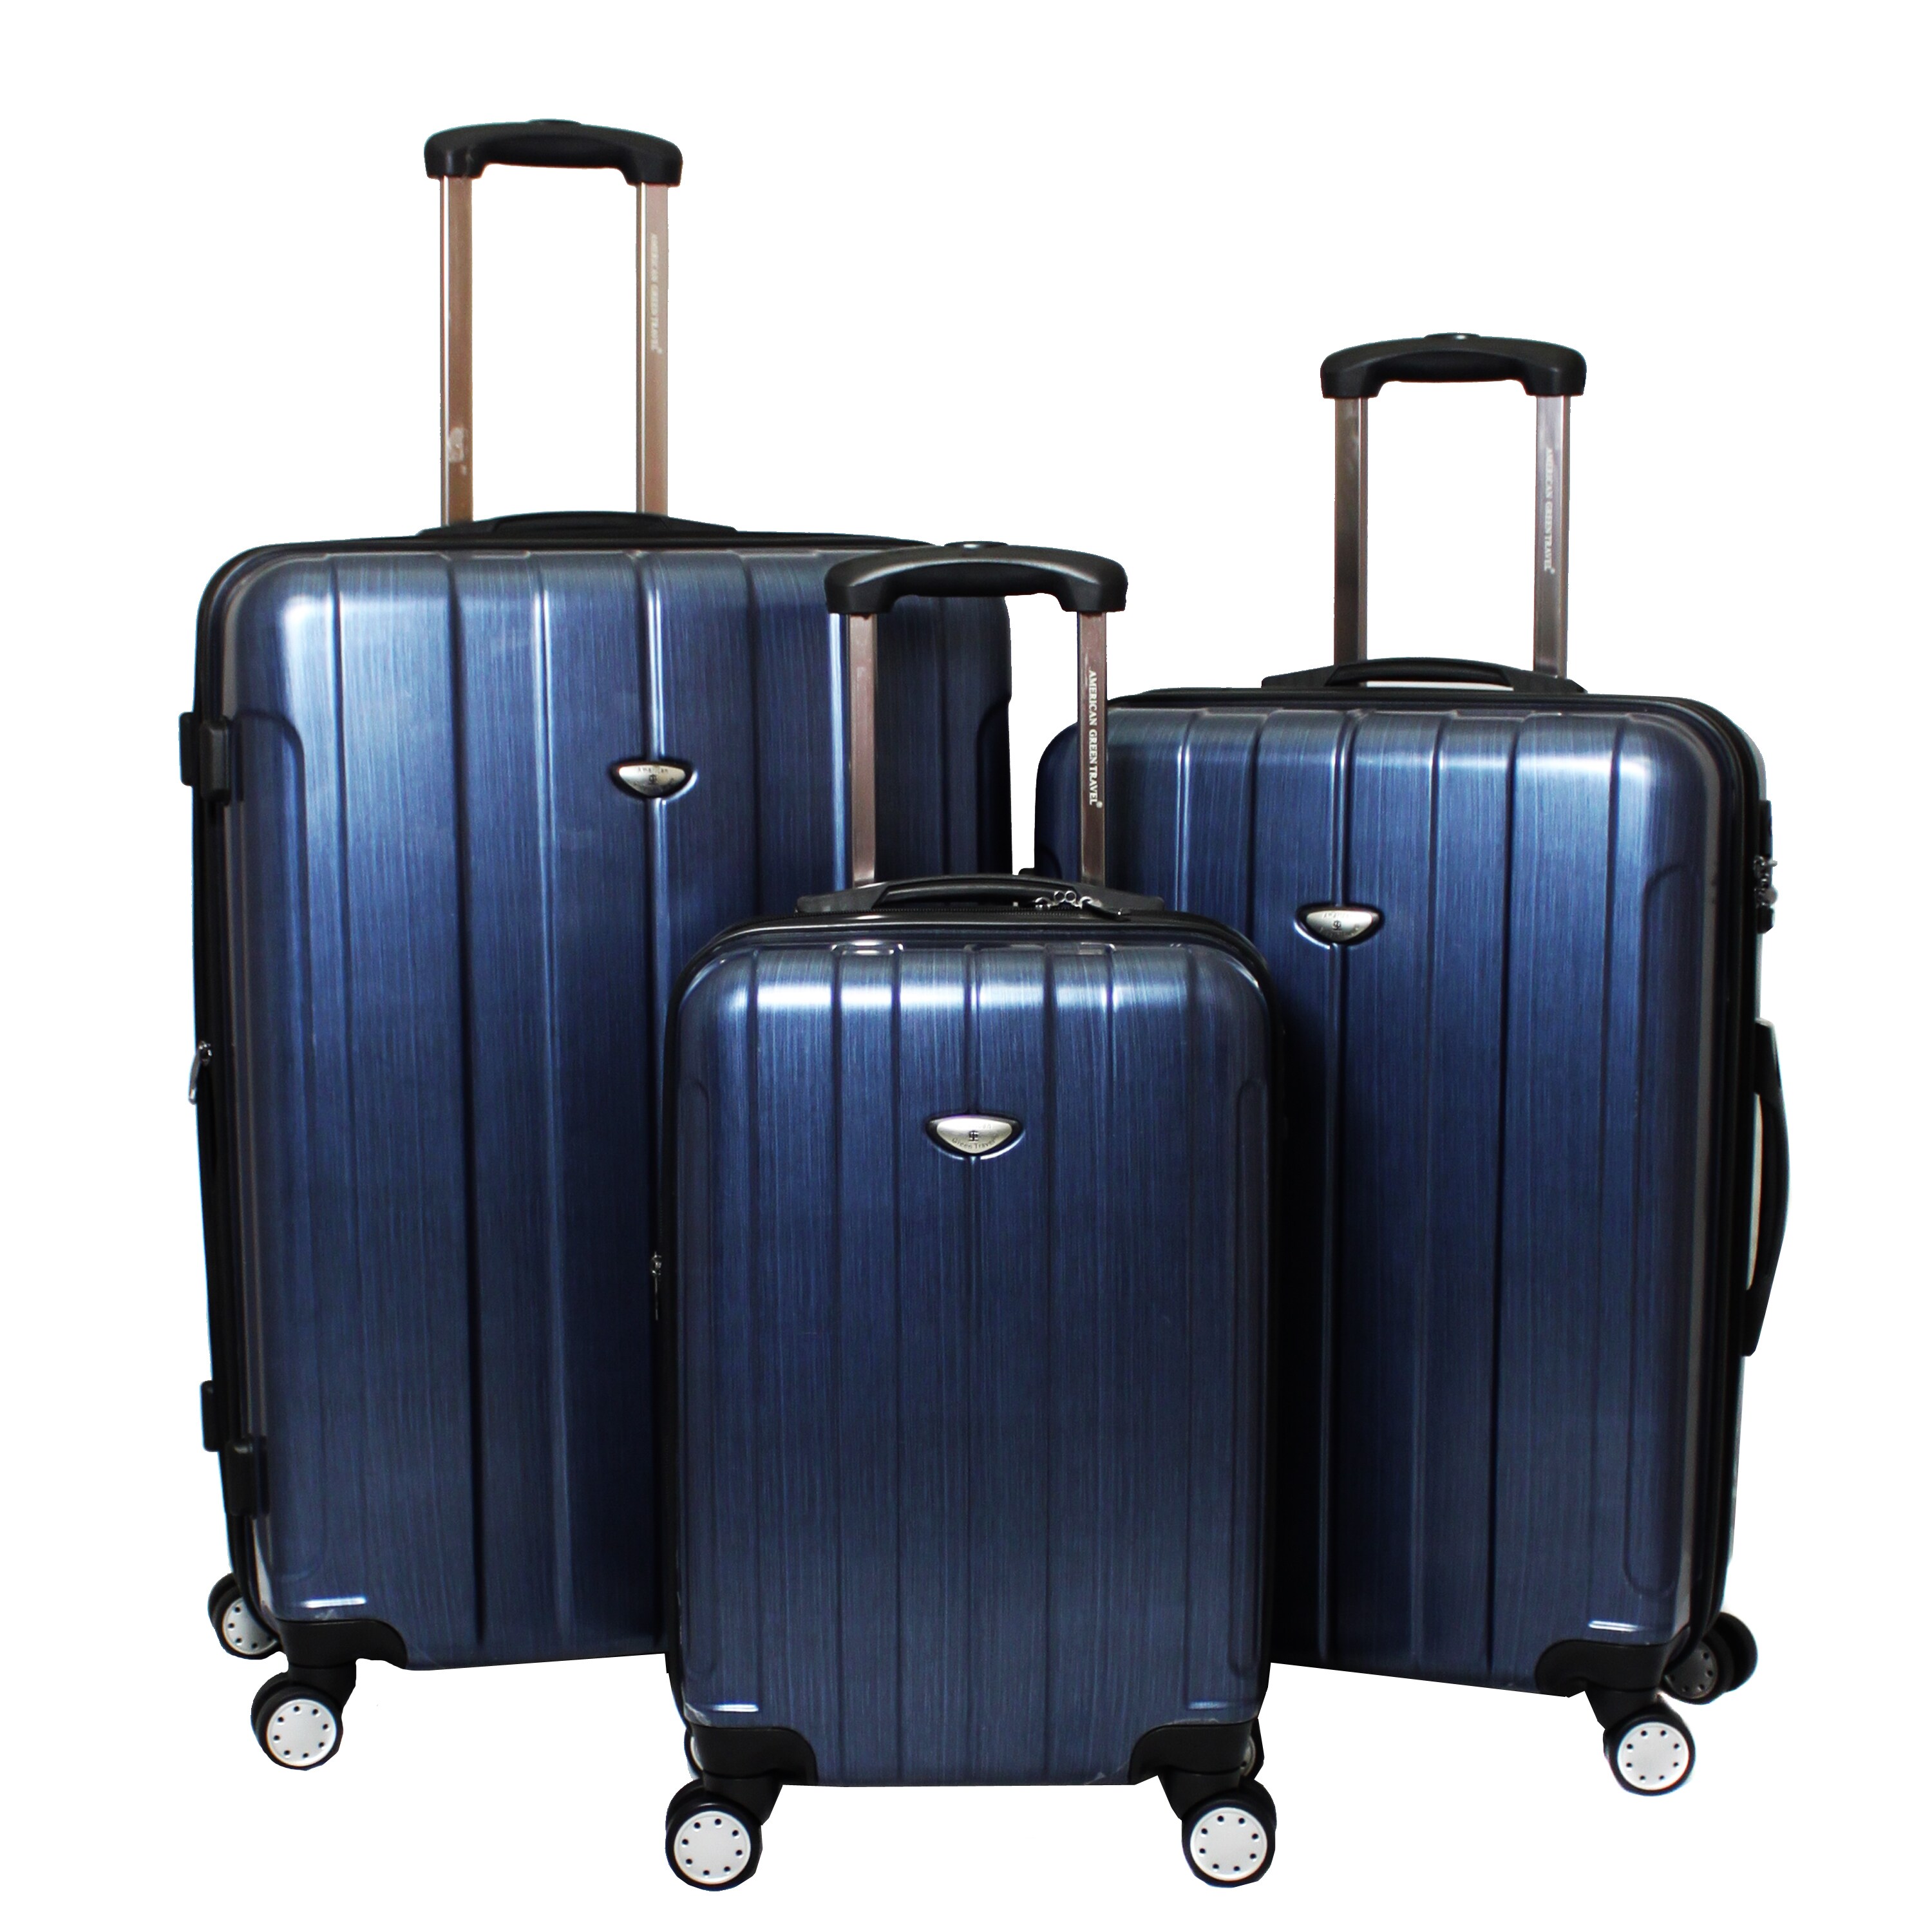 Travel luggage bondi junction quest, luggage lightweight polycarbonate ...